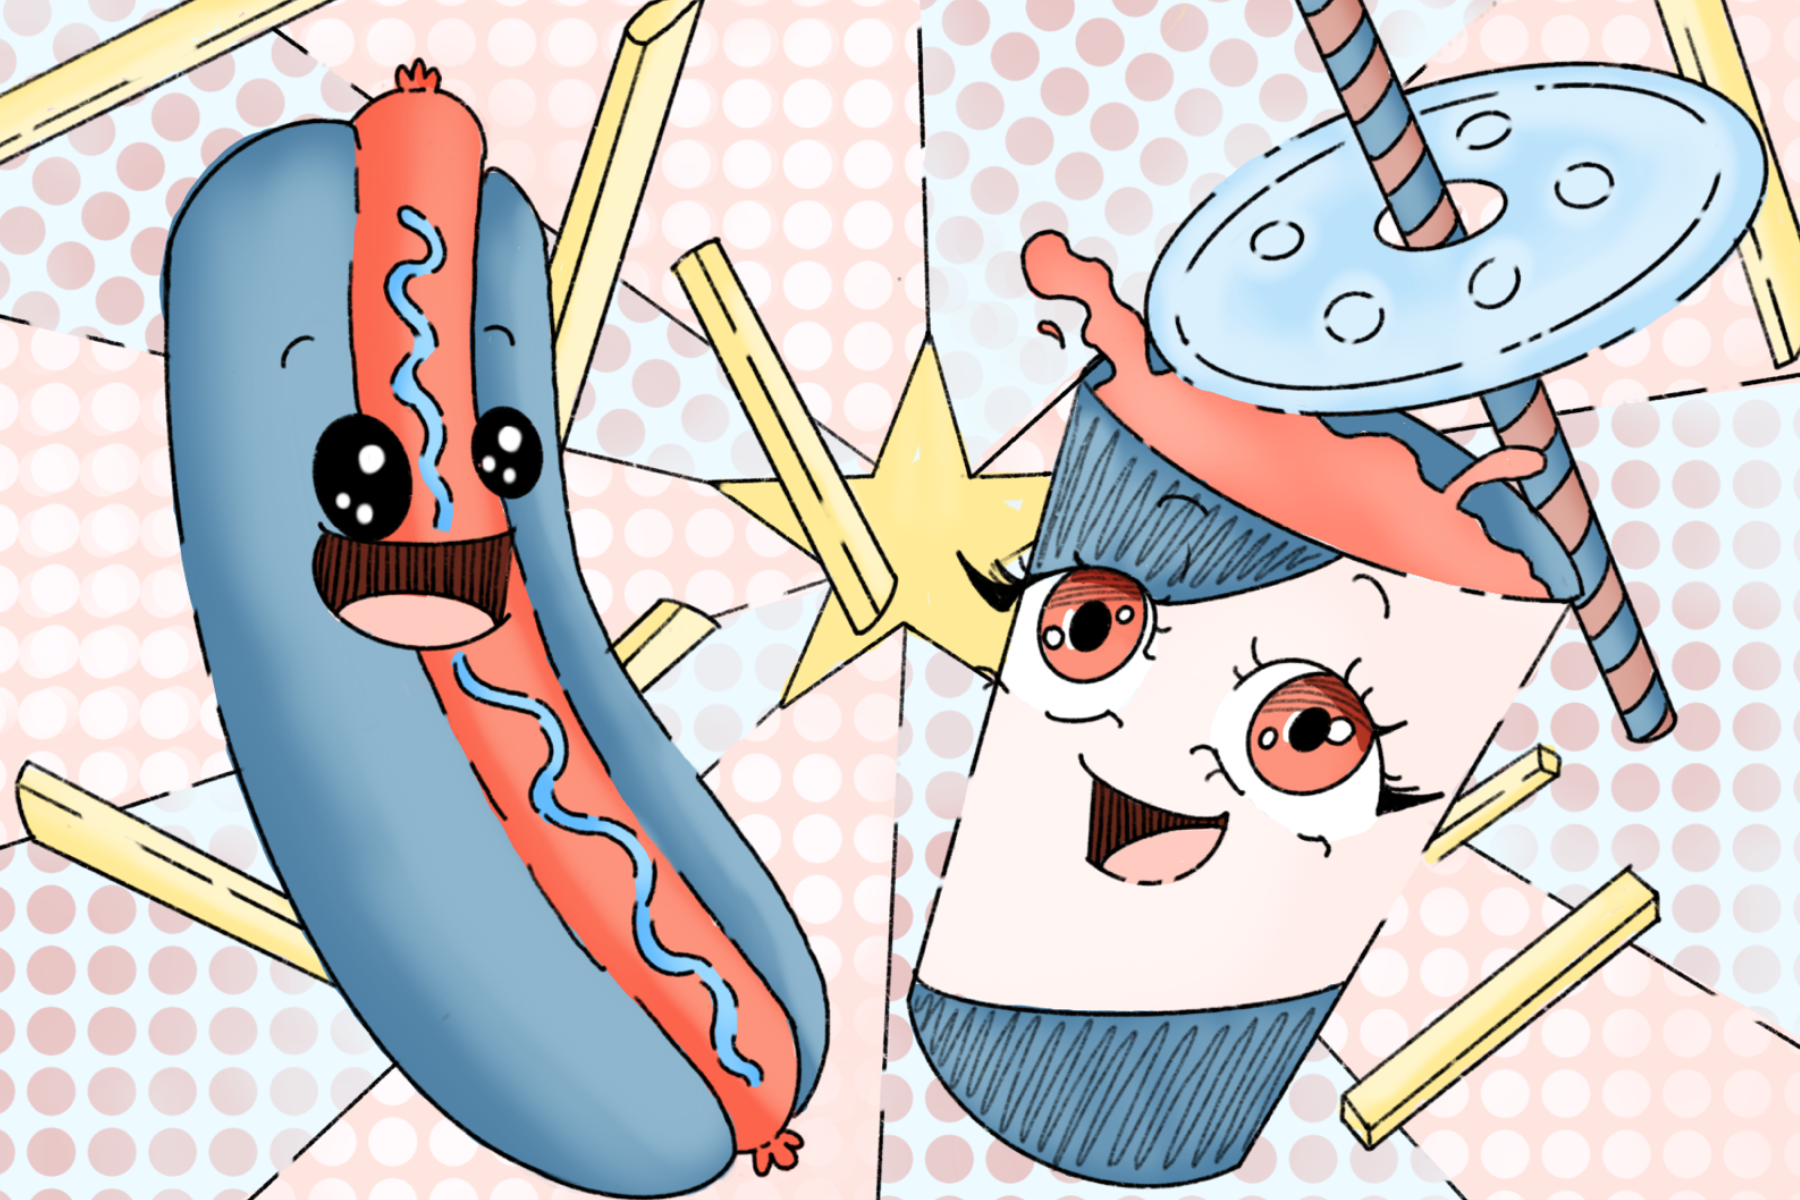 An illustration of a hot dog and a soda cup with cartoon eyes.